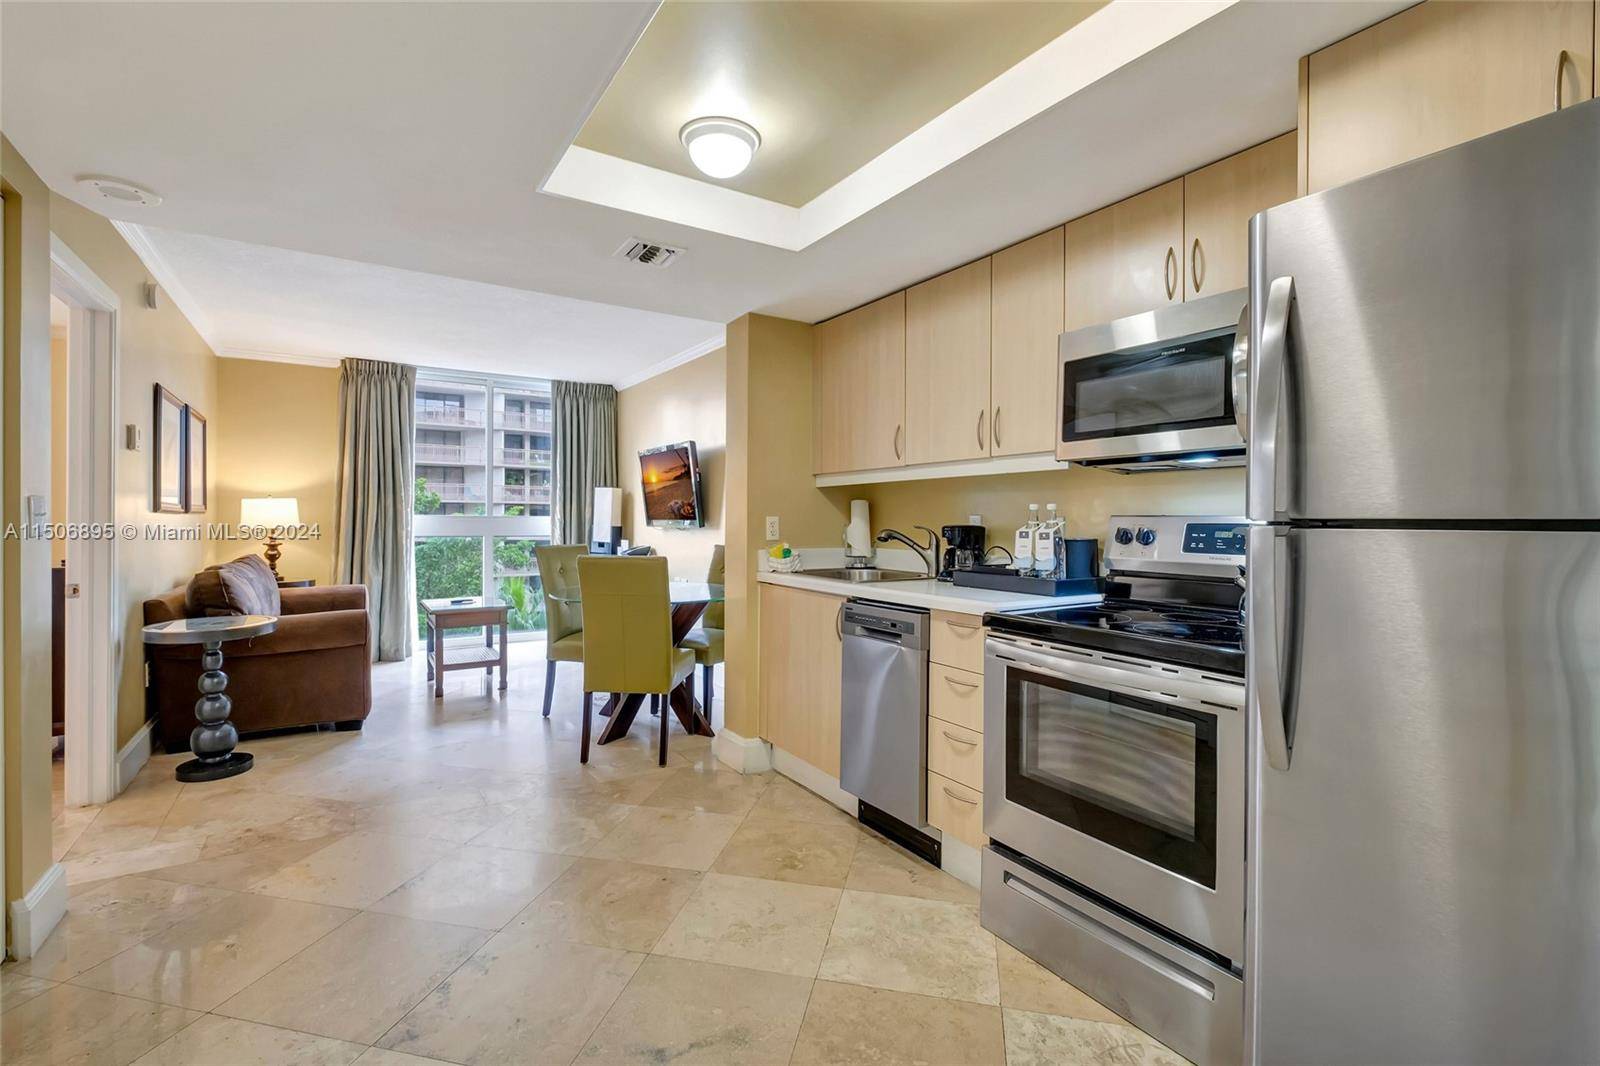 Enjoy the best of Coconut Grove living in this beautiful 1 bed 1 bath unit at the iconic Mutiny Hotel.